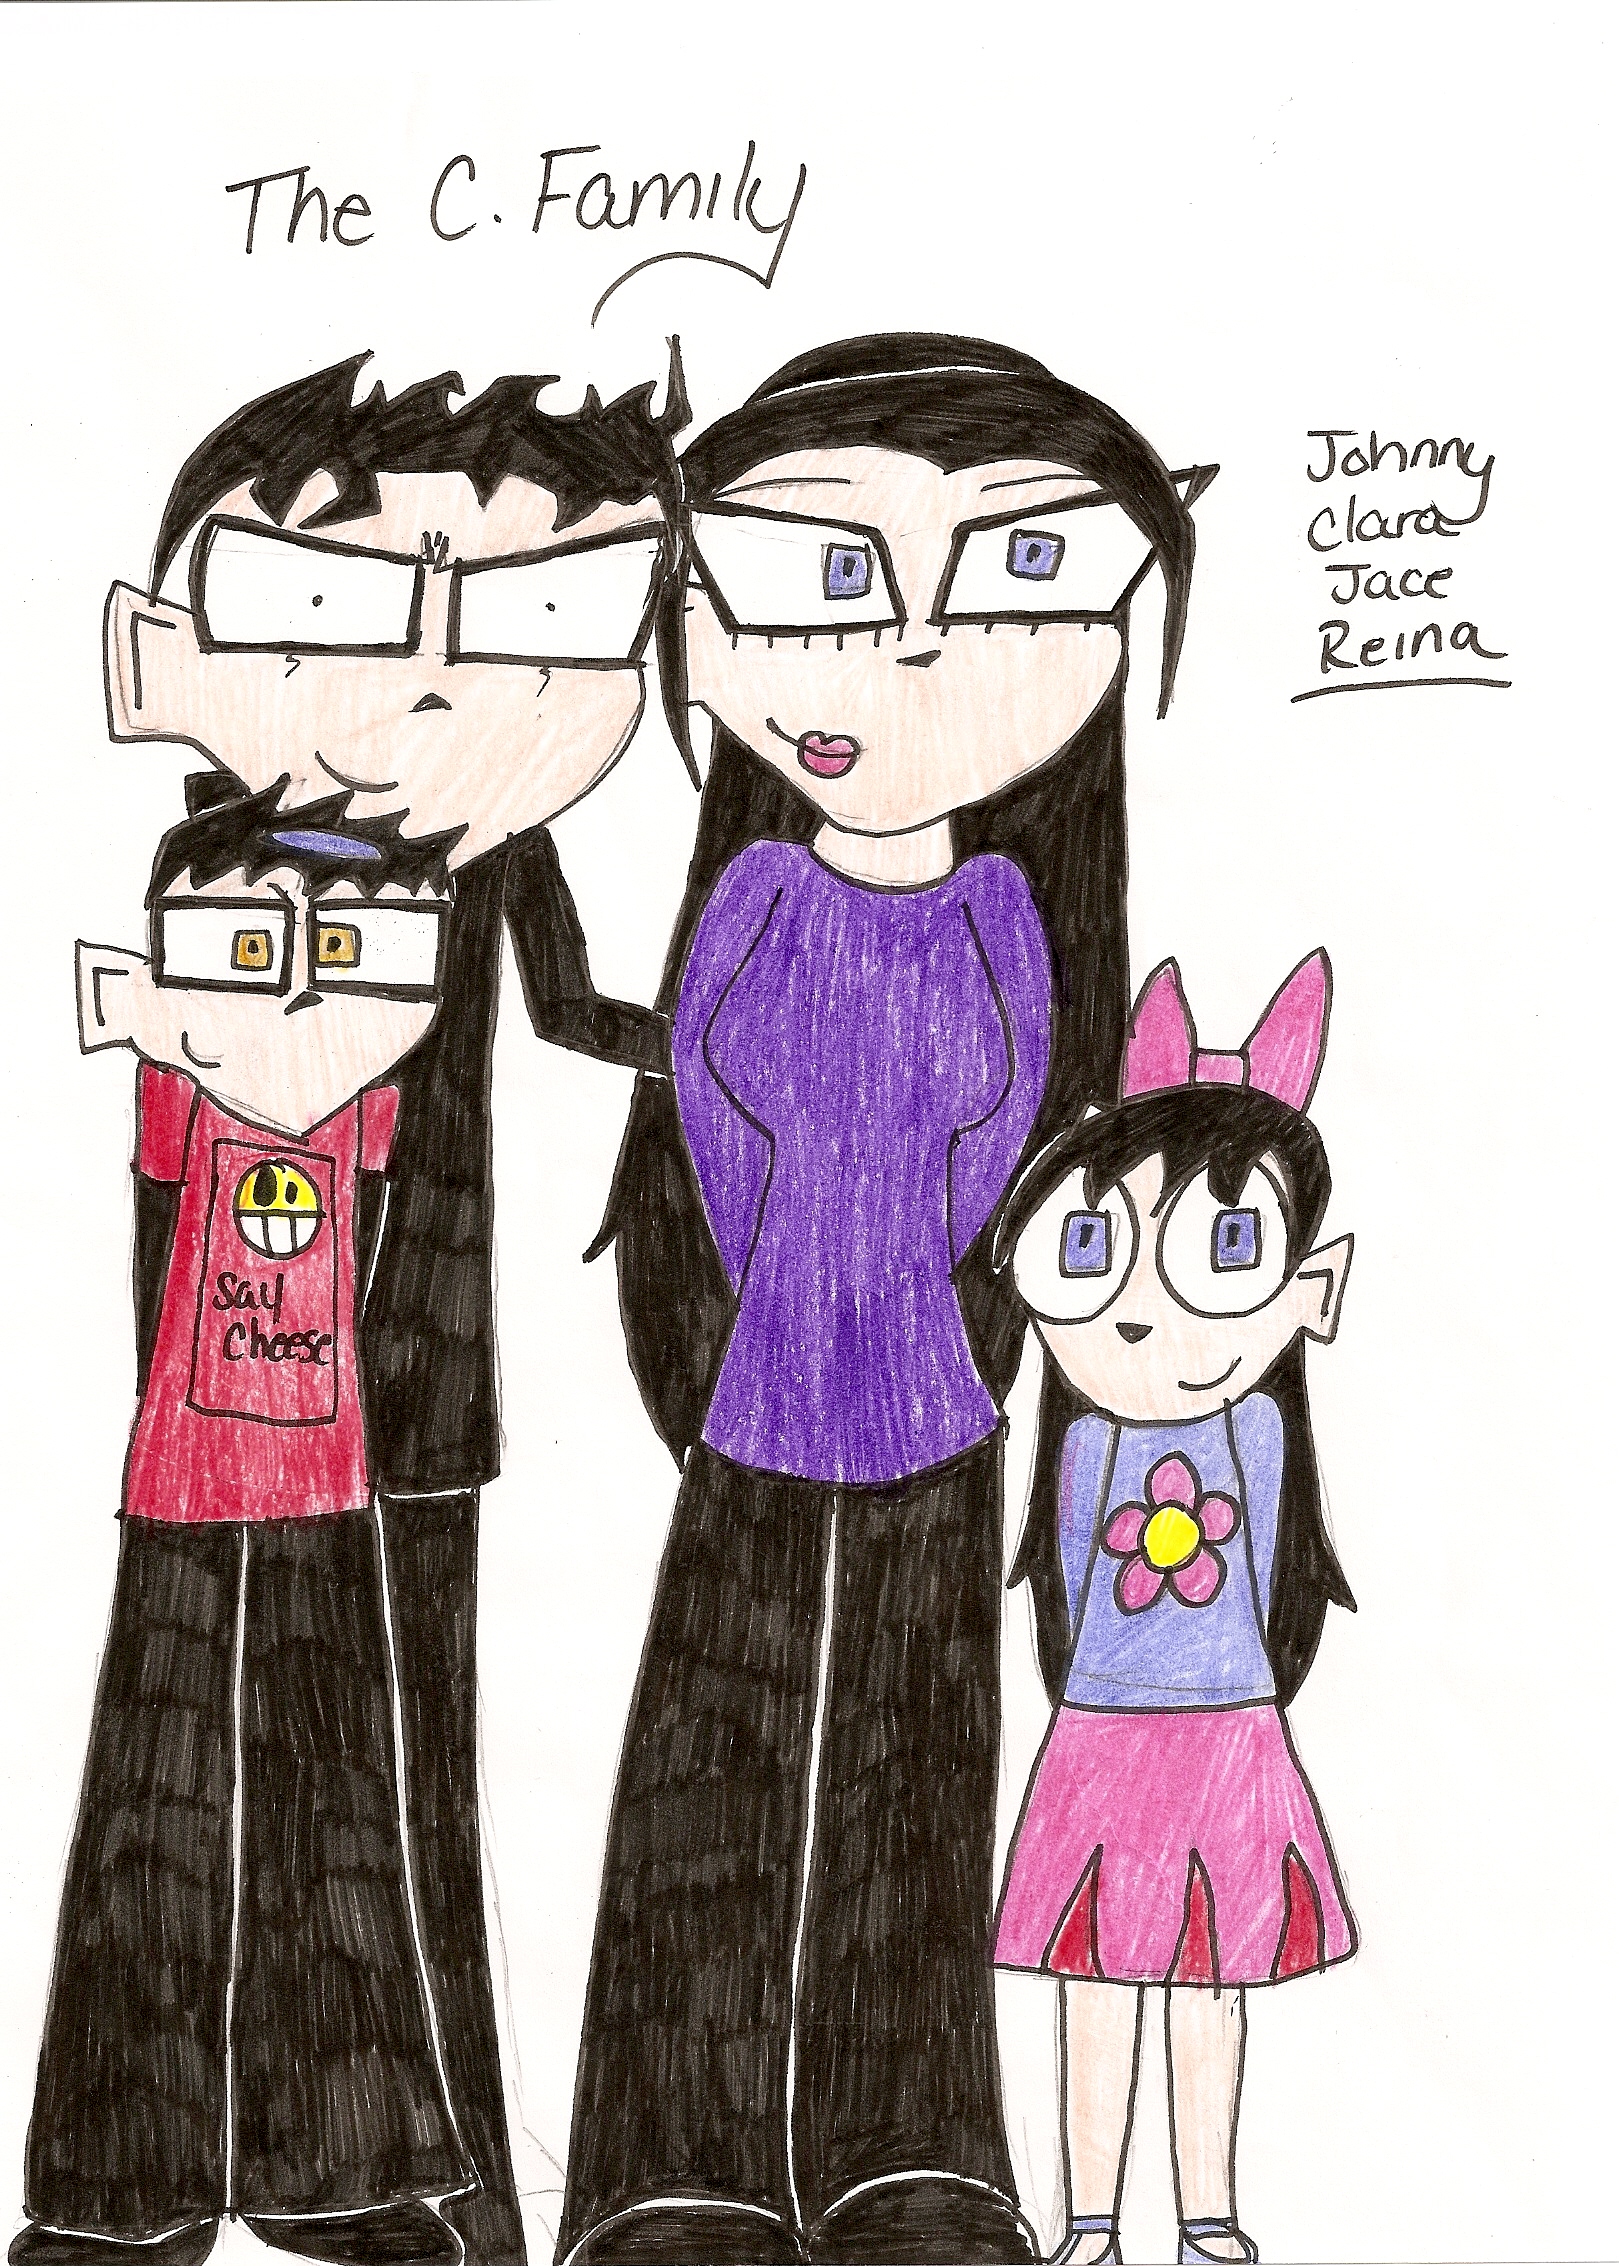 the c. family by thehaunted